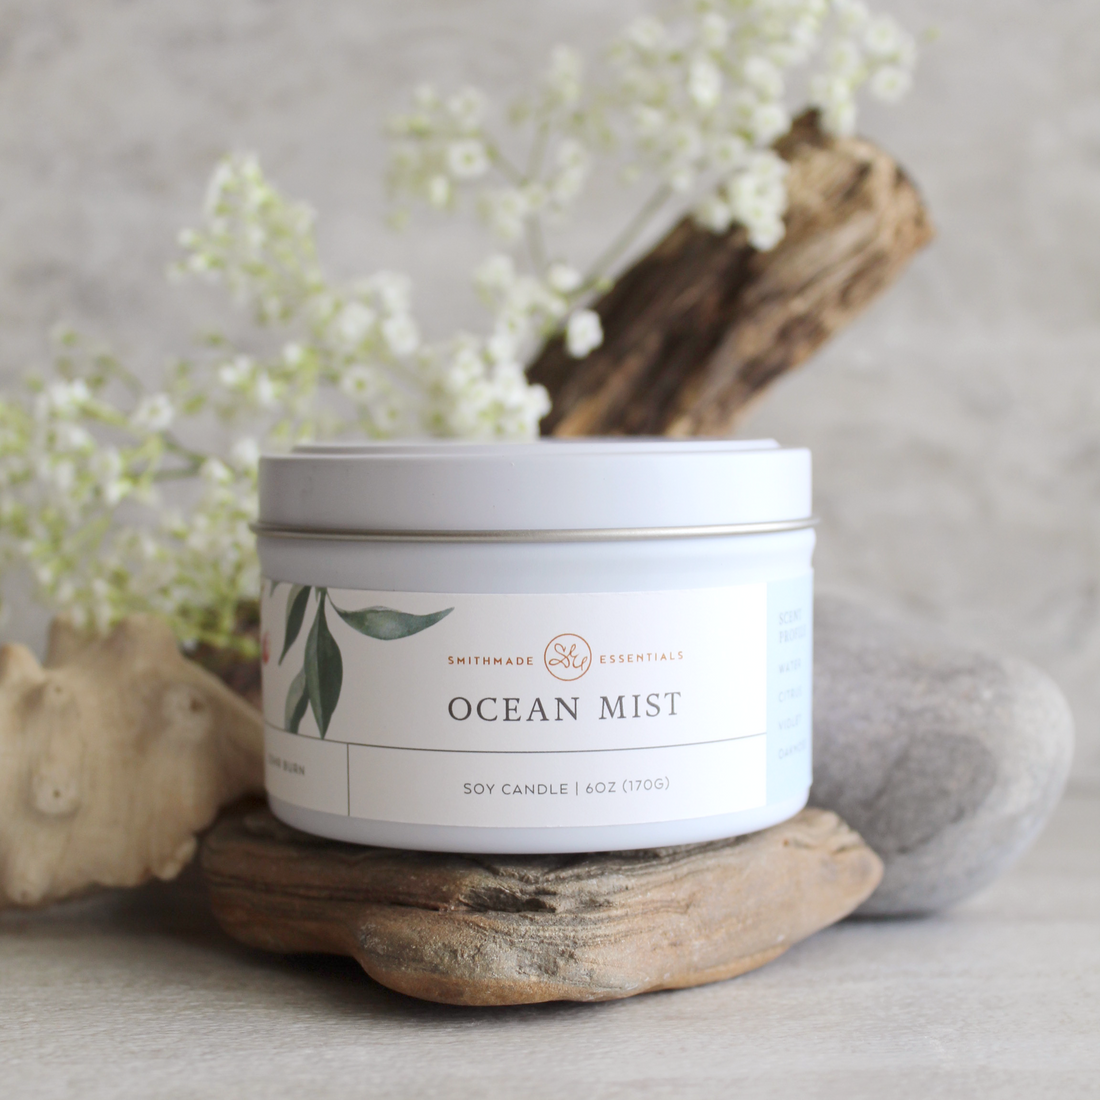 Ocean Mist Soy Candle